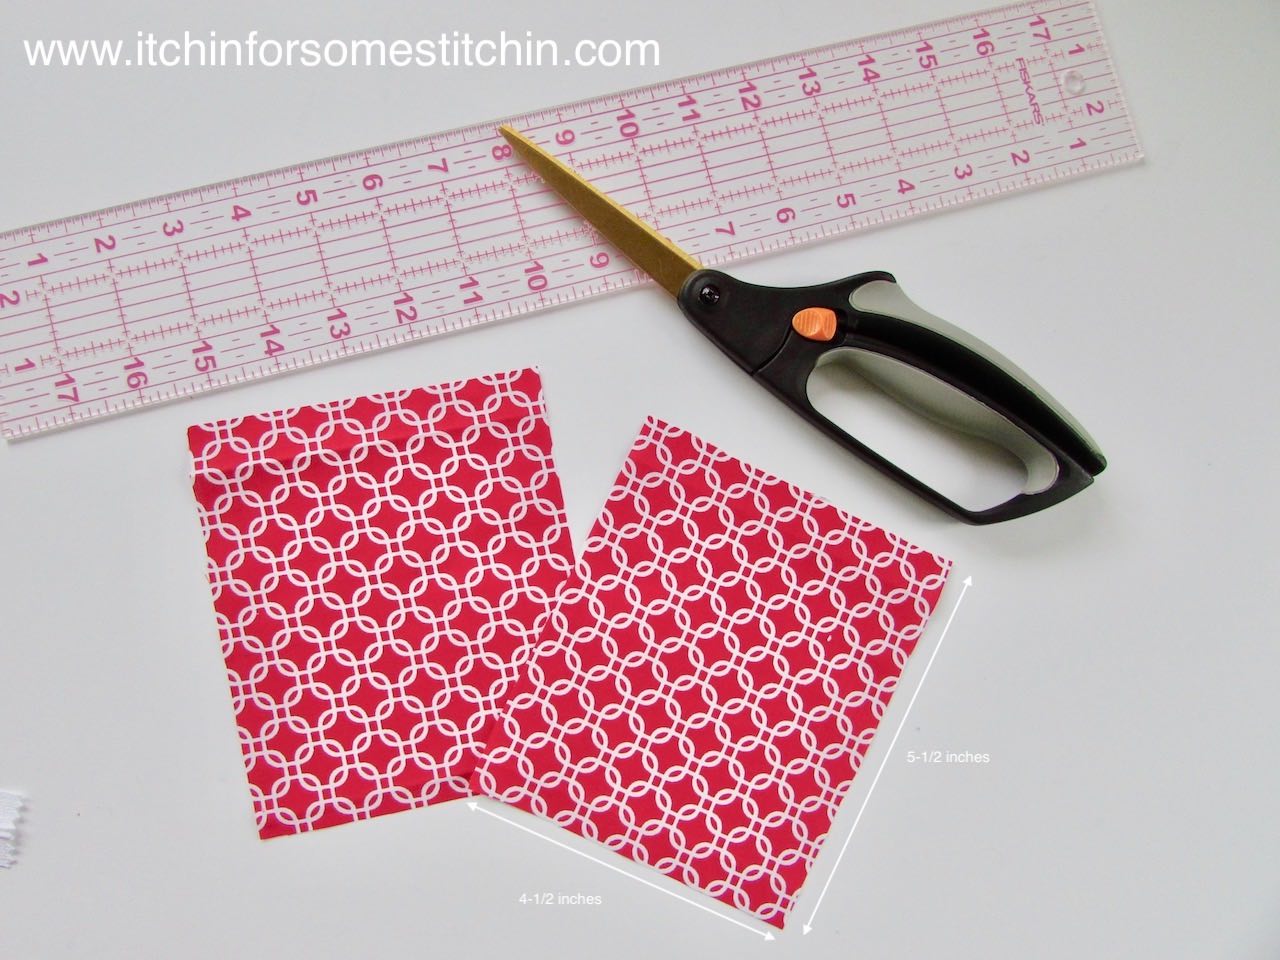 How to Sew a Simple Coin Purse by http://www.itchinforsomestitchin.com